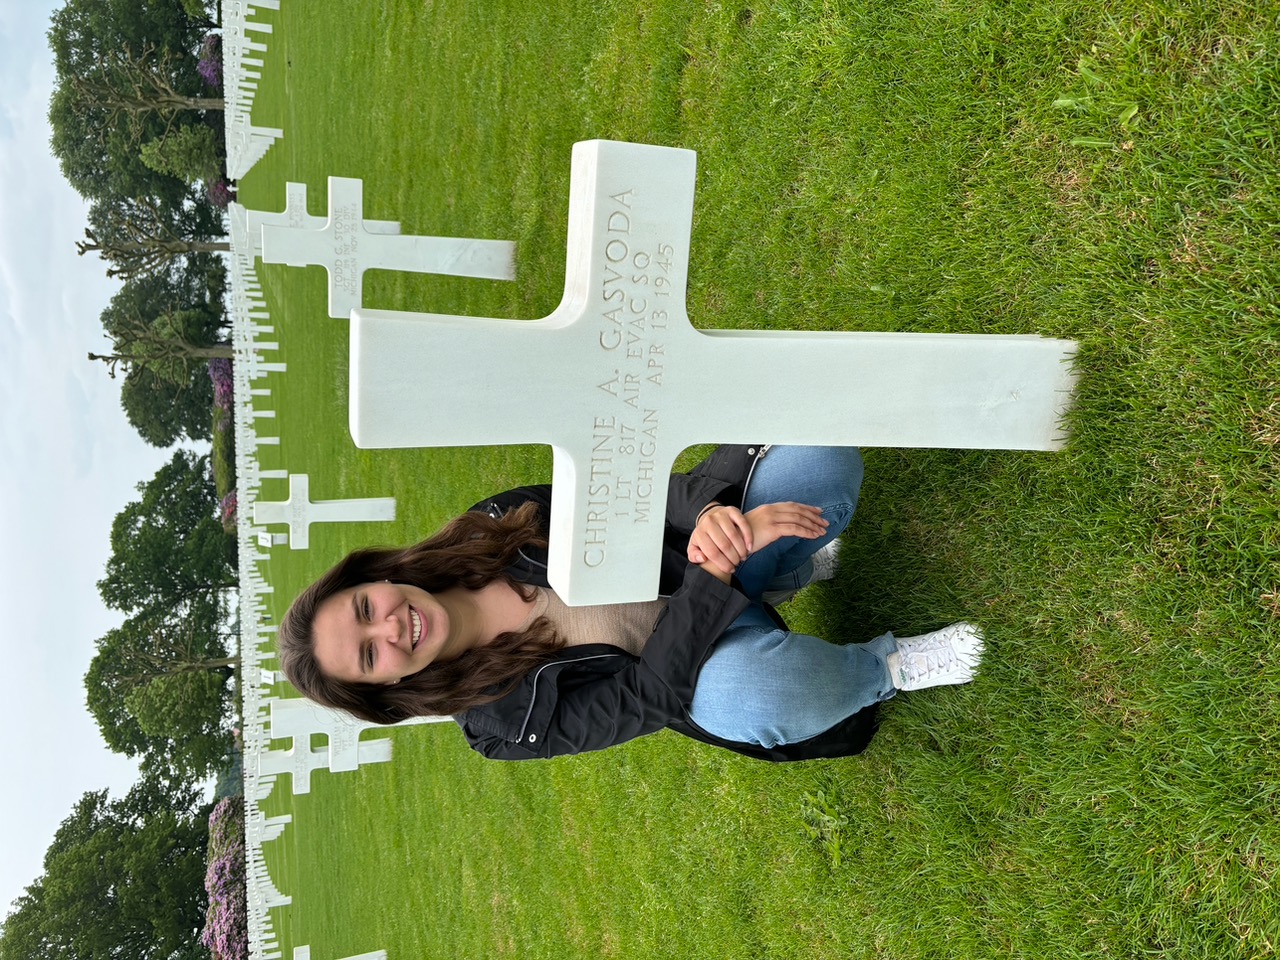 U.S. Air Force ROTC cadet and ABMC International Fellow Catherine Prince poses next to the headstone of 1st Lt. Christine A. Gasvoda. While learning more about the service members buried at the site, Prince learned one of the four women buried there was a native of a town near her home. Credits: American Battle Monuments Commission.